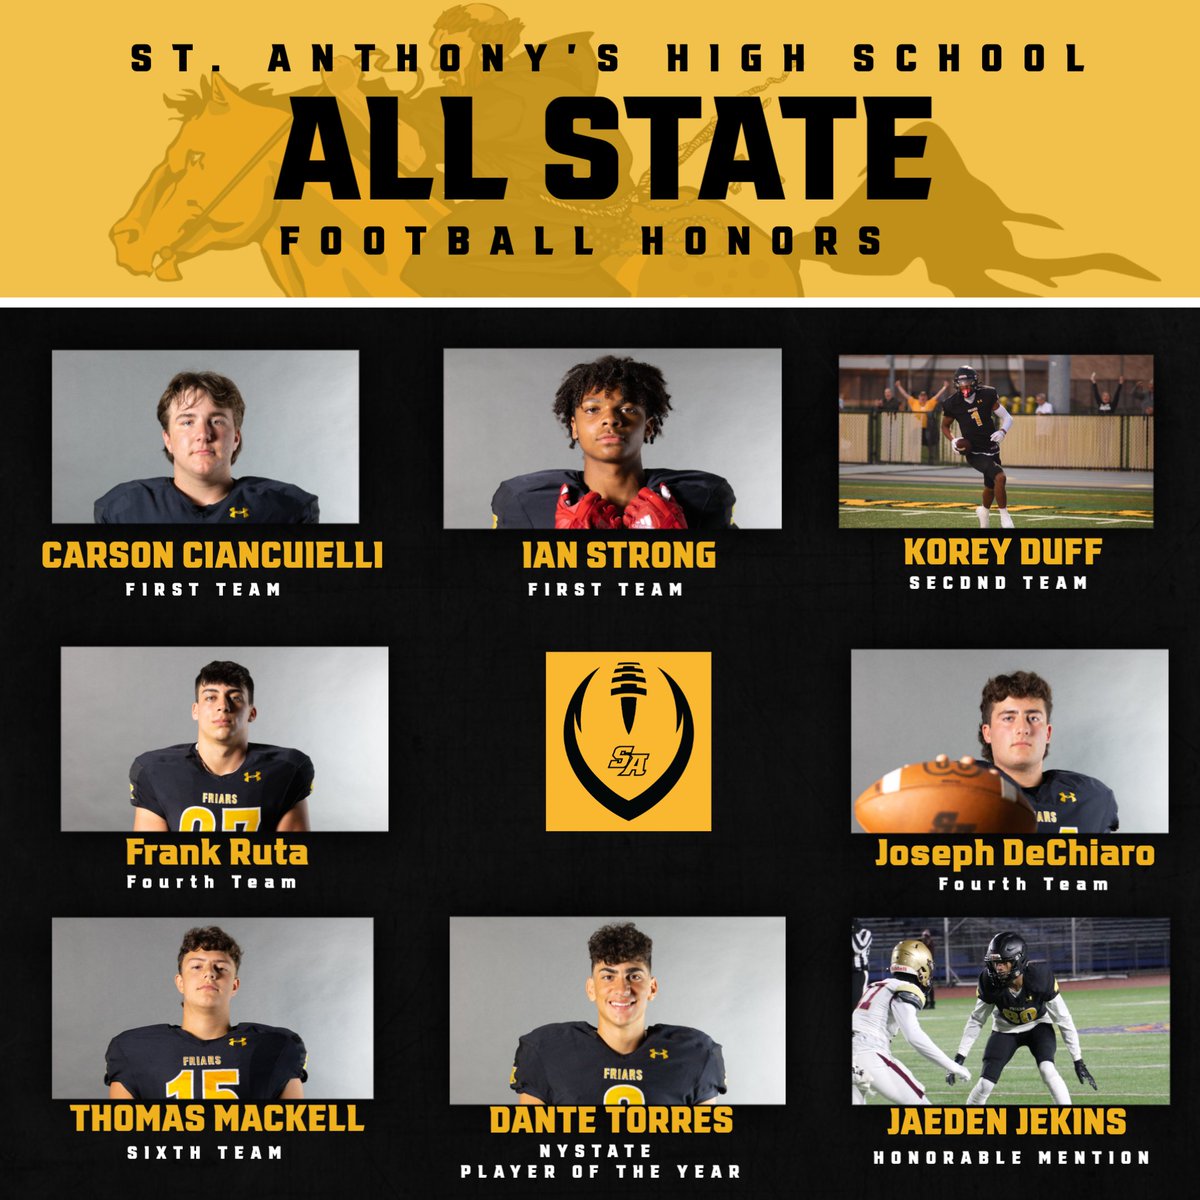 CONGRATULATIONS to the Friar All State Team members. @StAnthonysFB